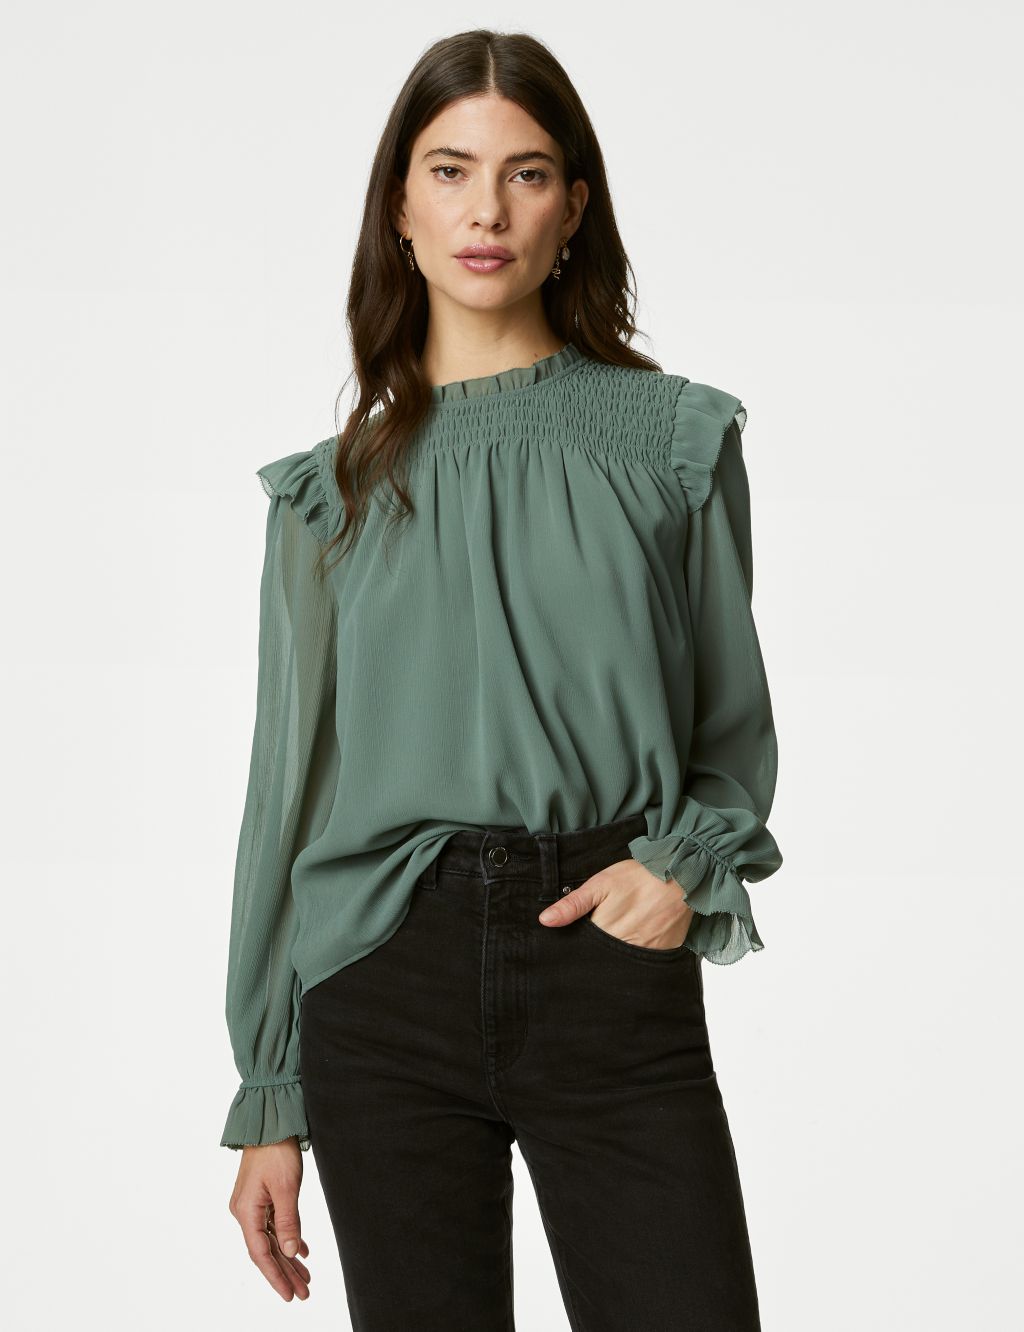 Shirred High Neck Frill Detail Blouse image 4